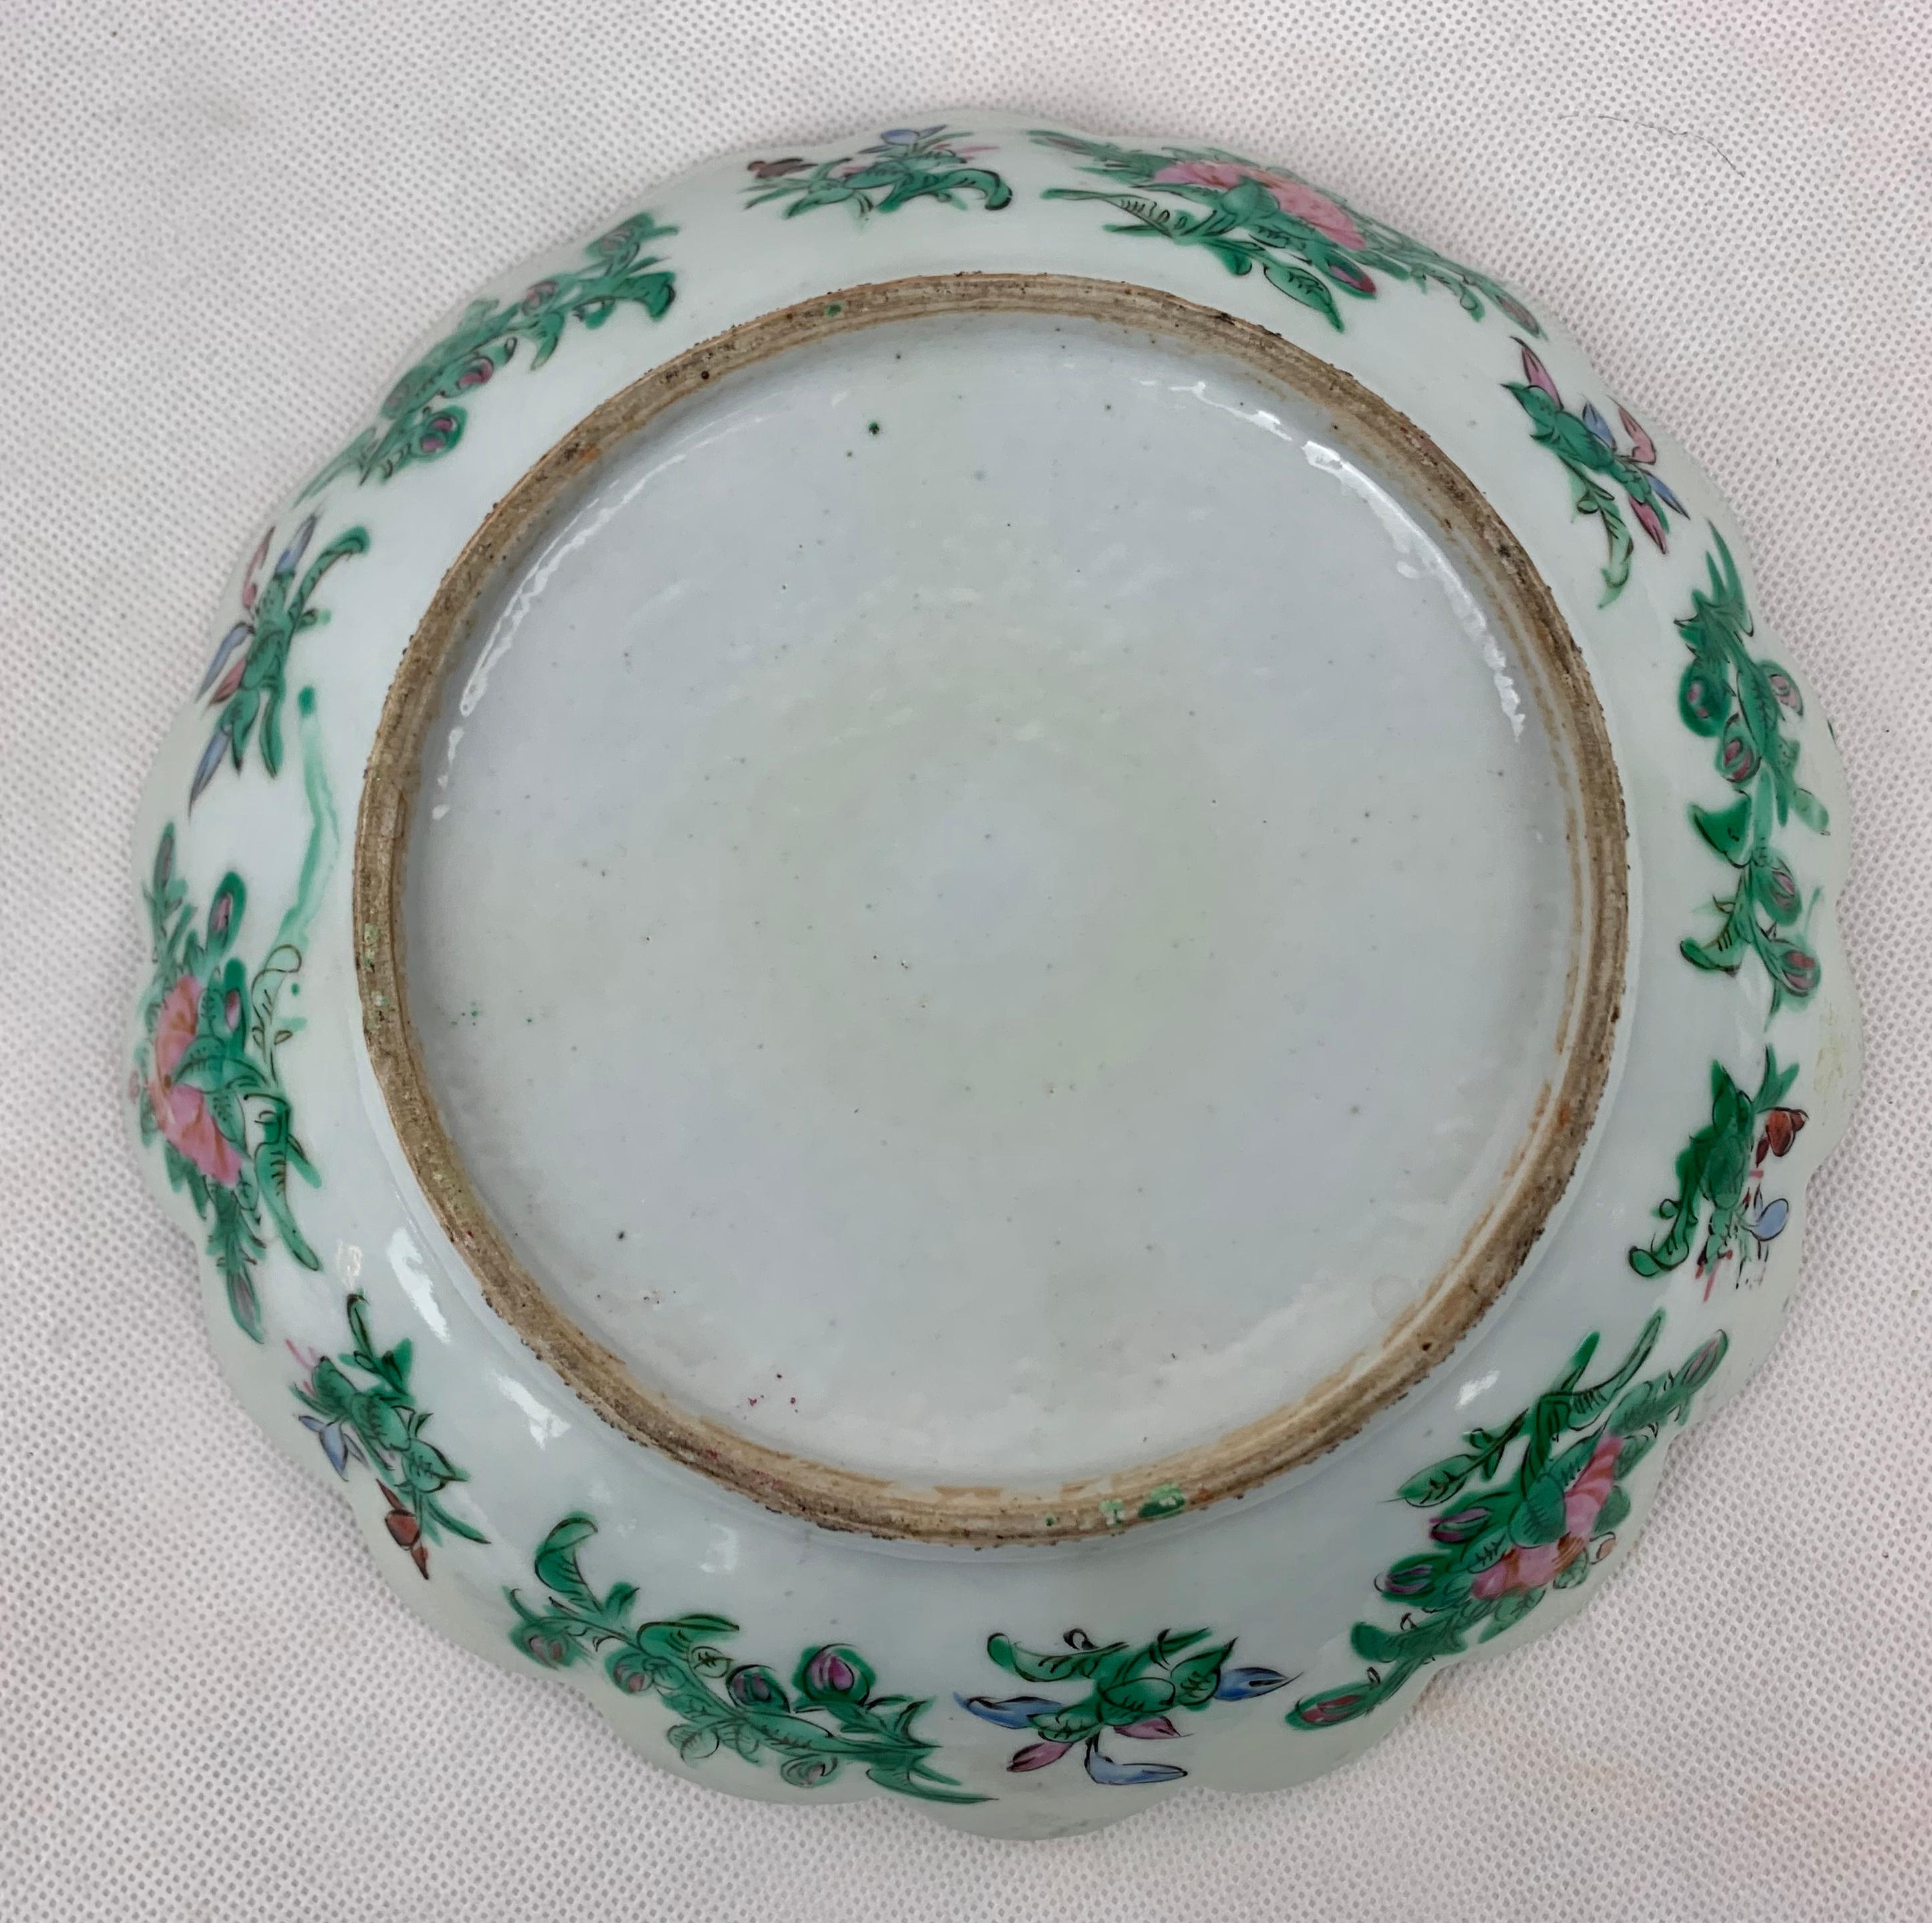 Scalloped Edge Rose Medallion Hand Decorated Porcelain Bowl-Chinese Export 1